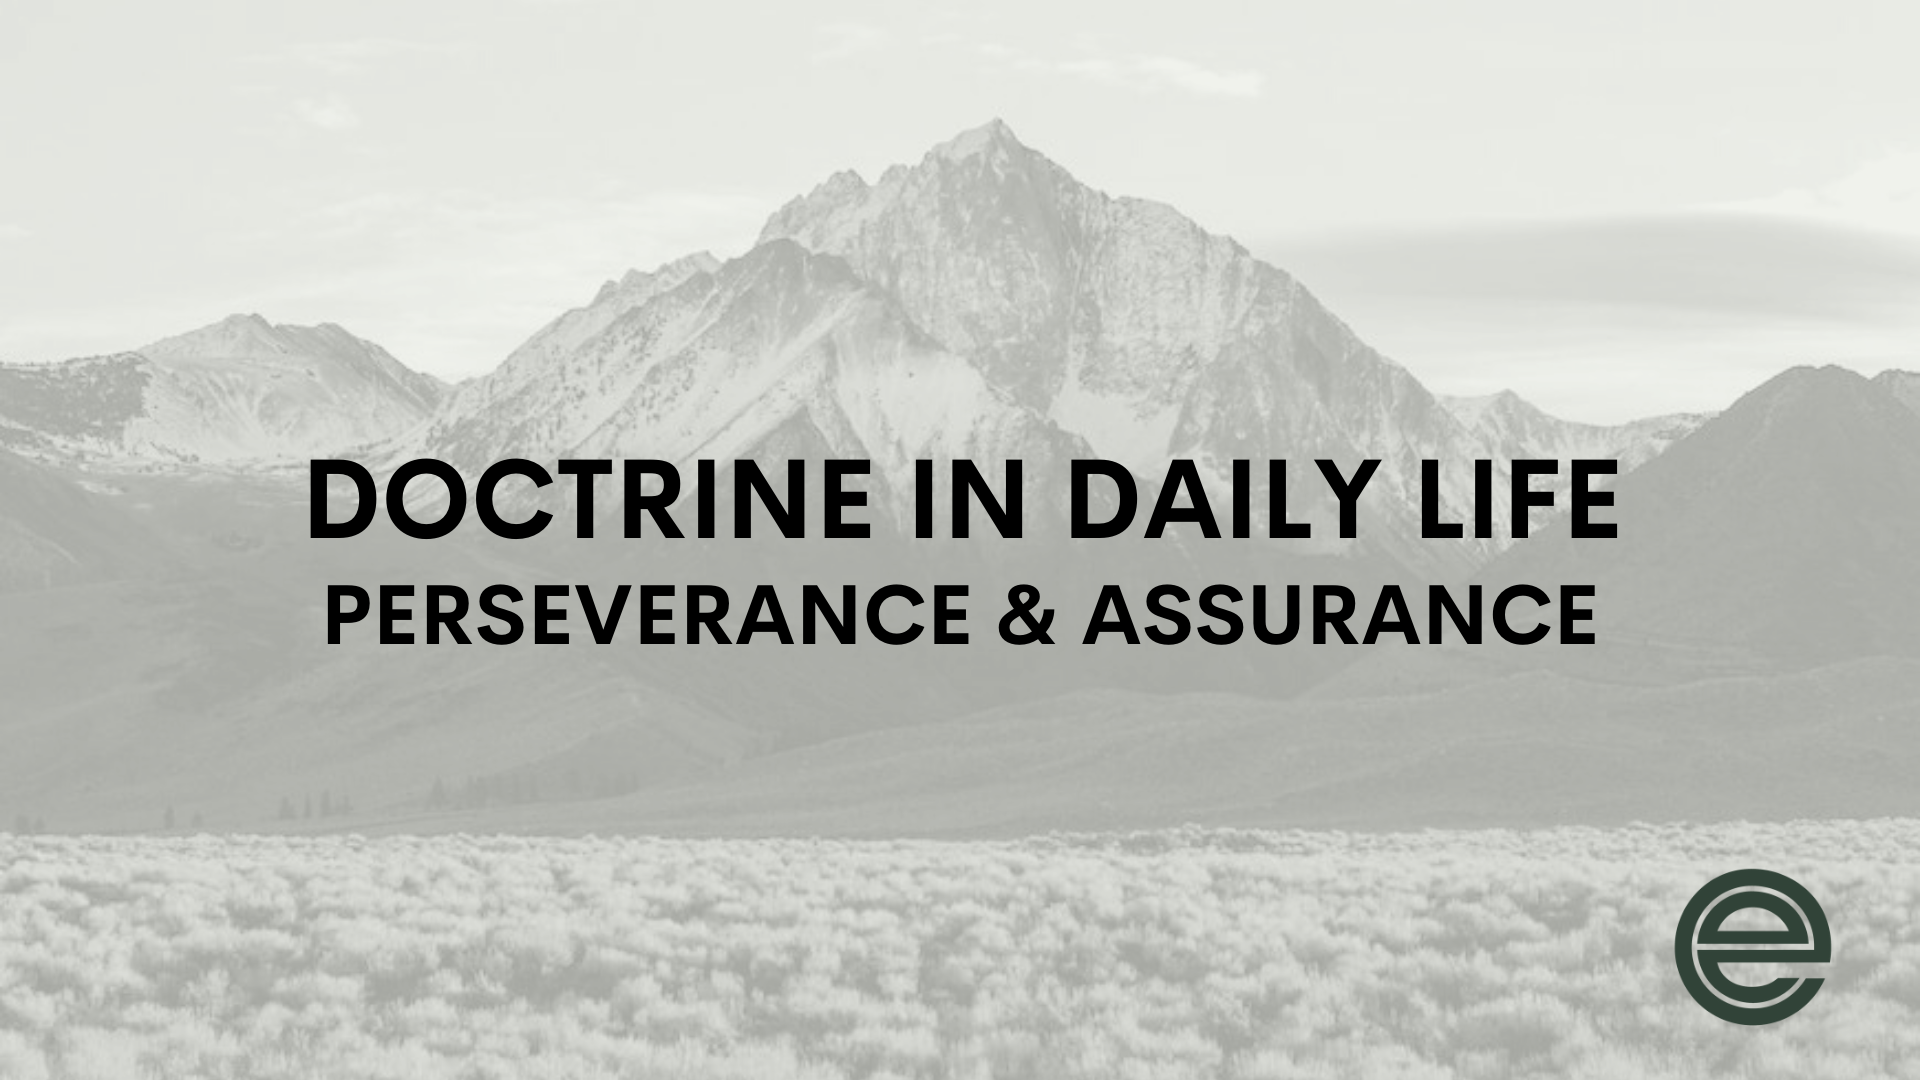 Equip_Doctrine in Daily Life_2022 image